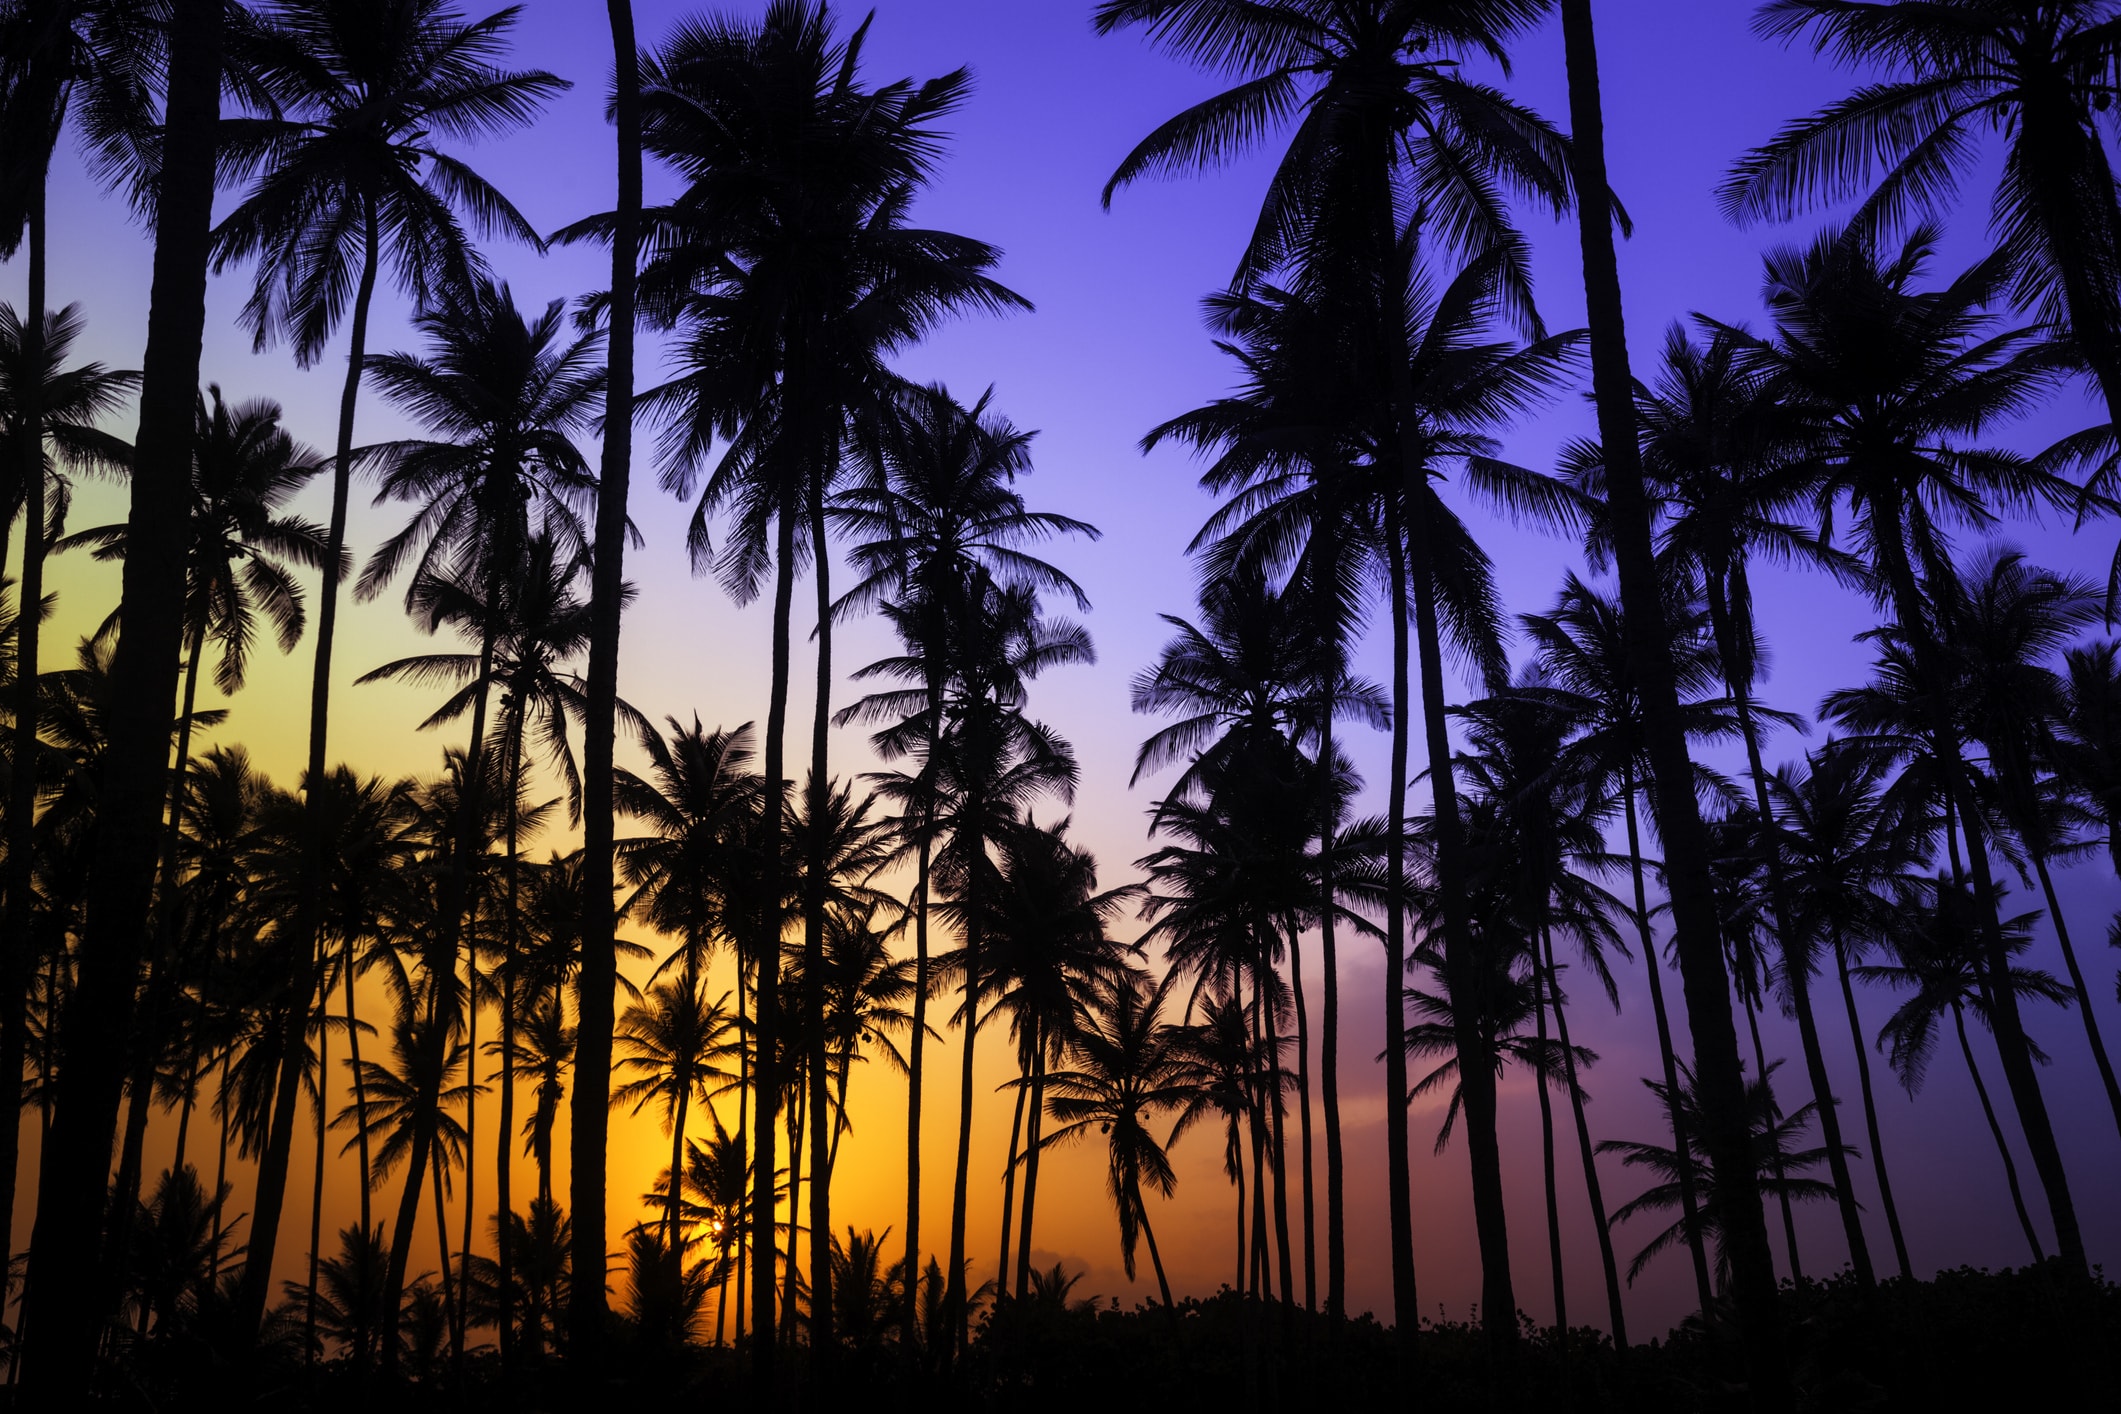 Colorful-tropical-coconut-trees-at-sunrise-171584929_2125x1416